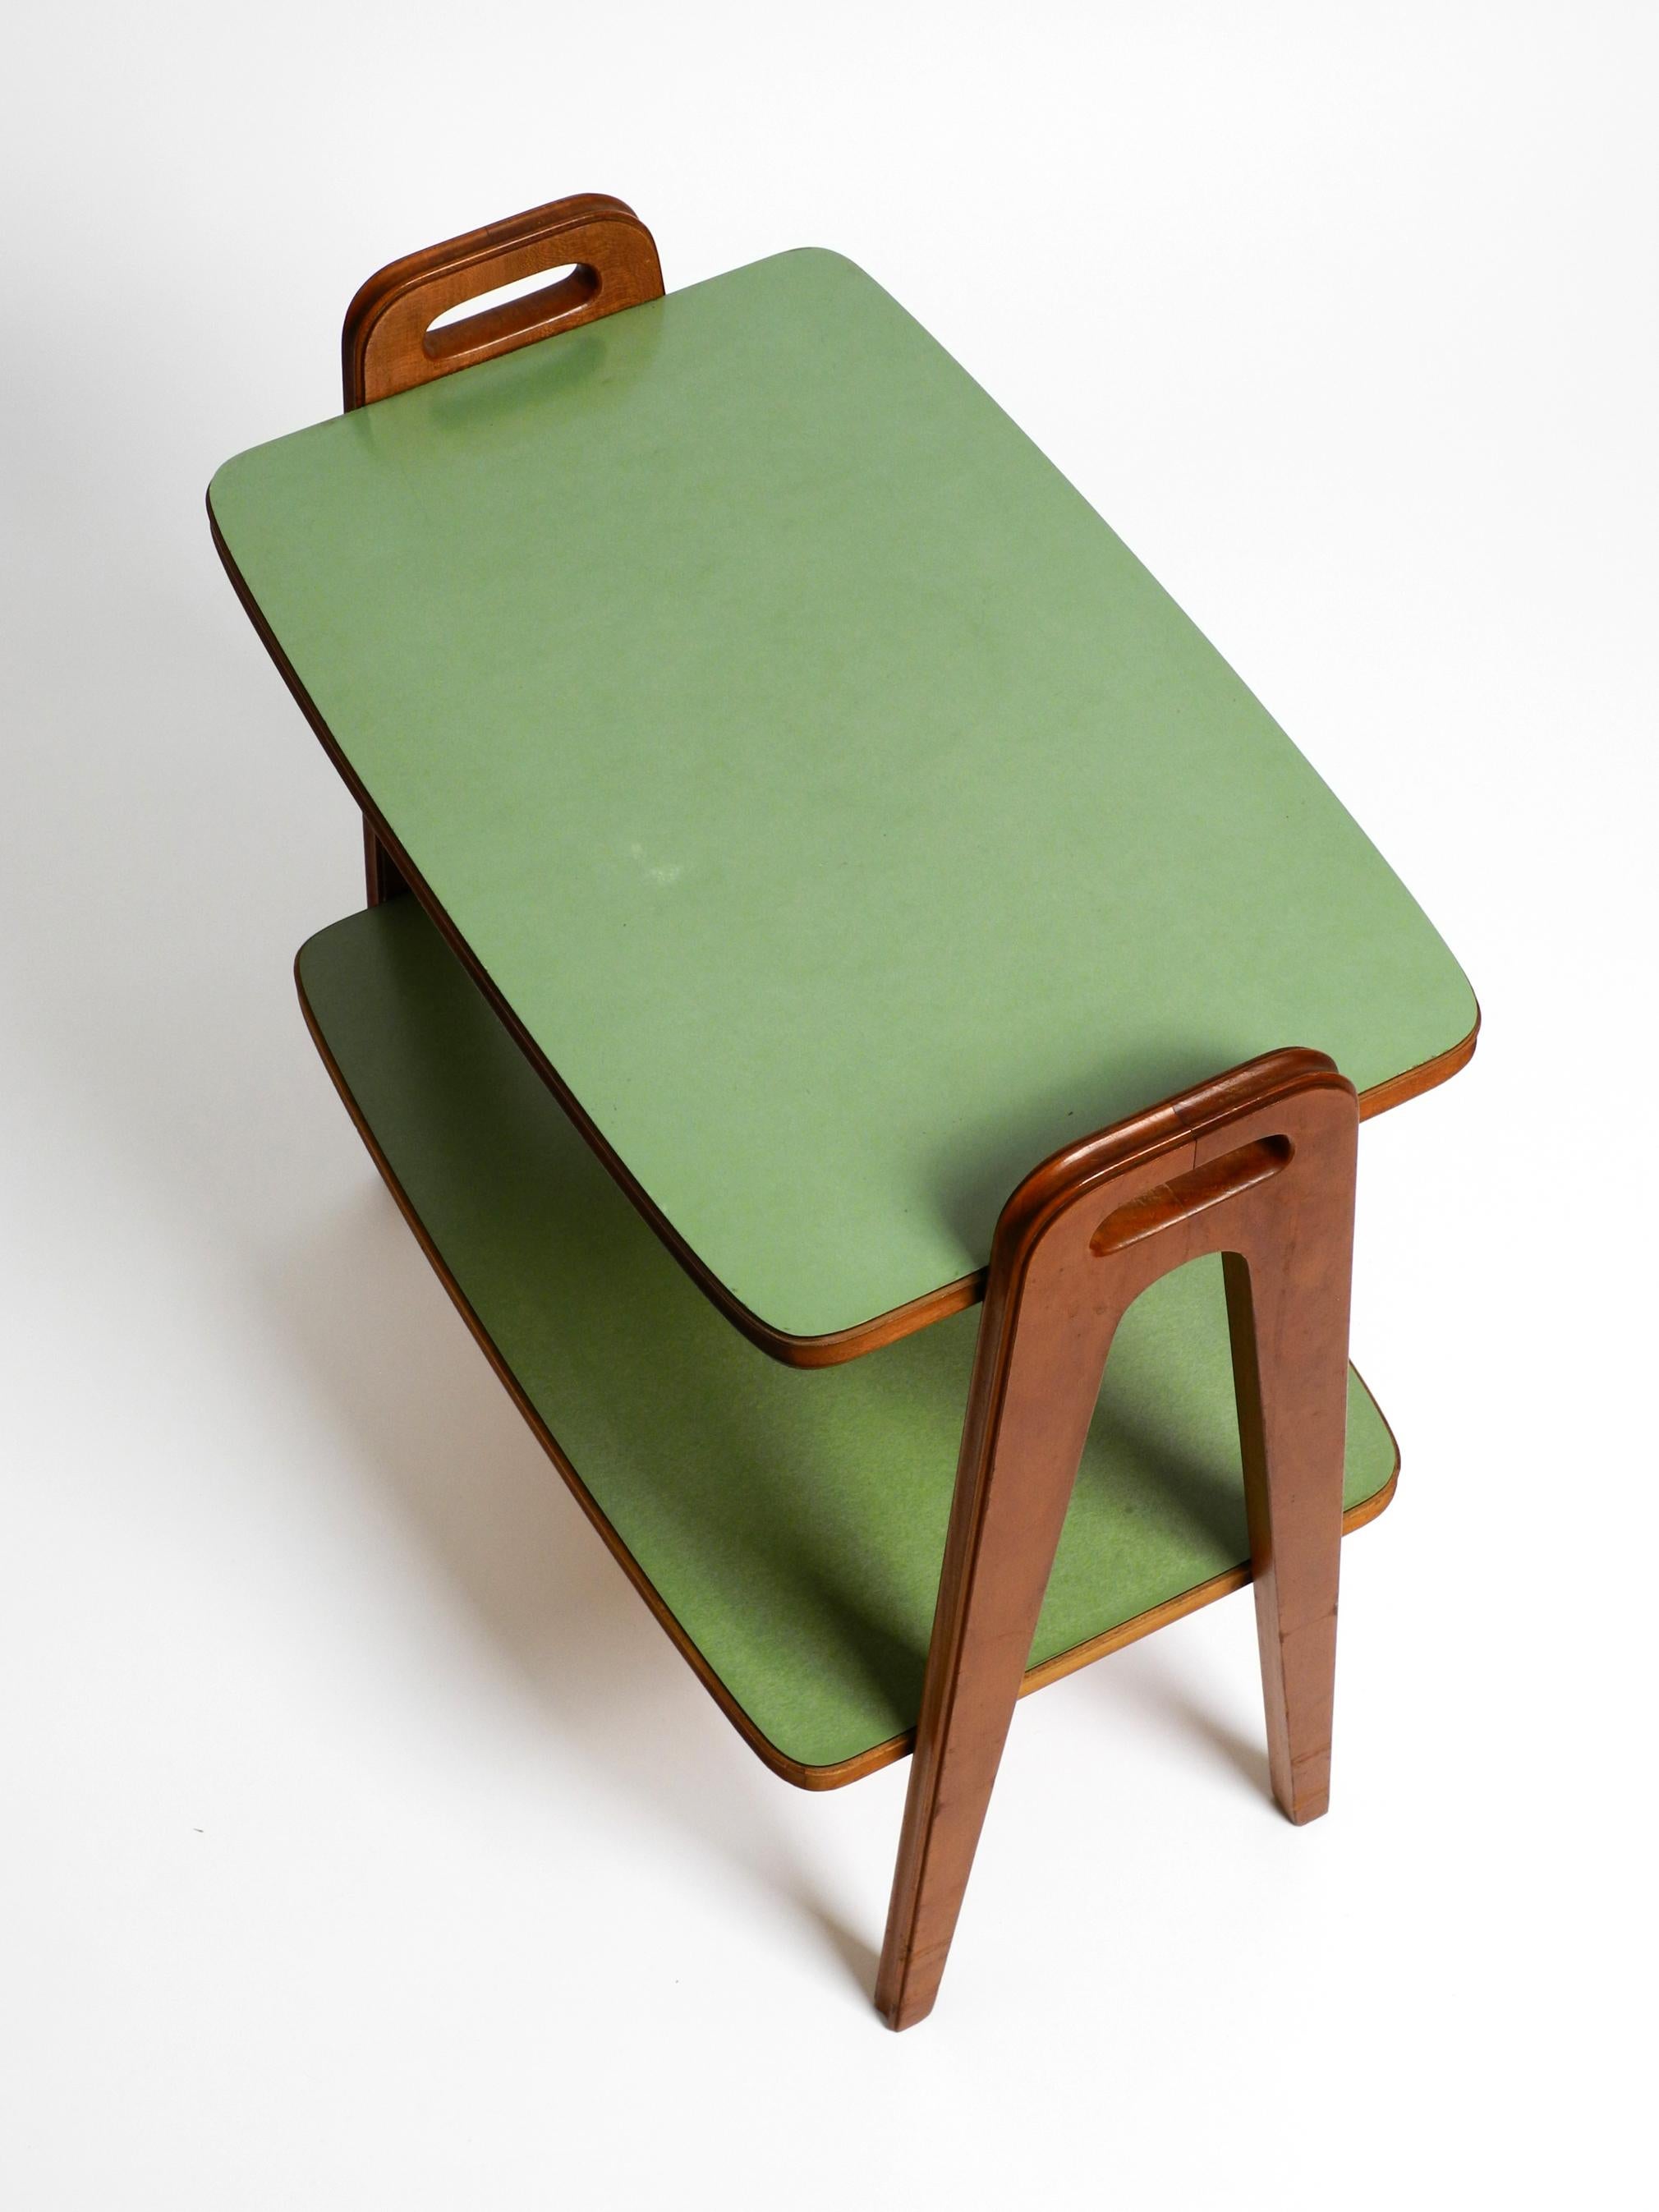 German Small Mid Century Modern side table made of walnut with green Formica surfaces